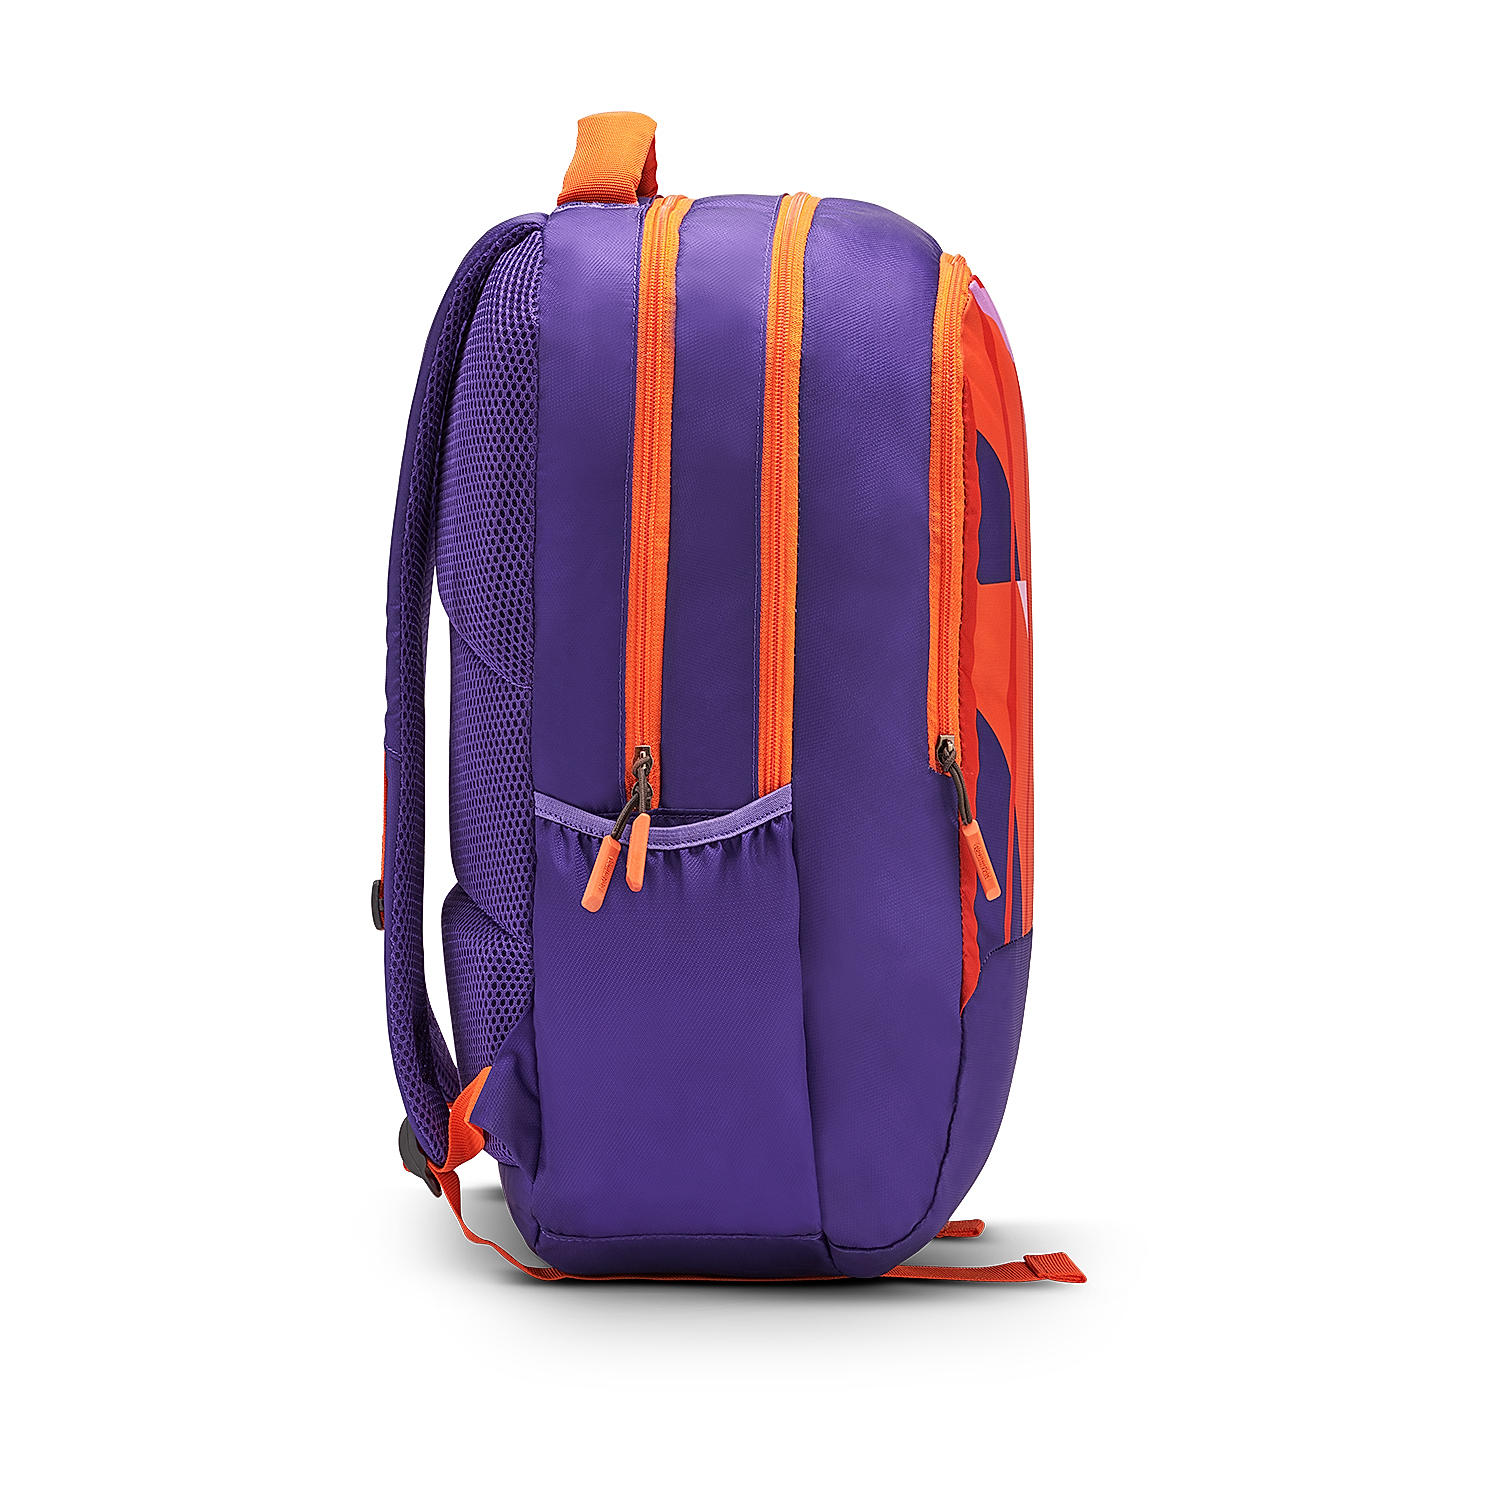 Buy Purple Quad 2.0 Backpack 02 for School Online at American 